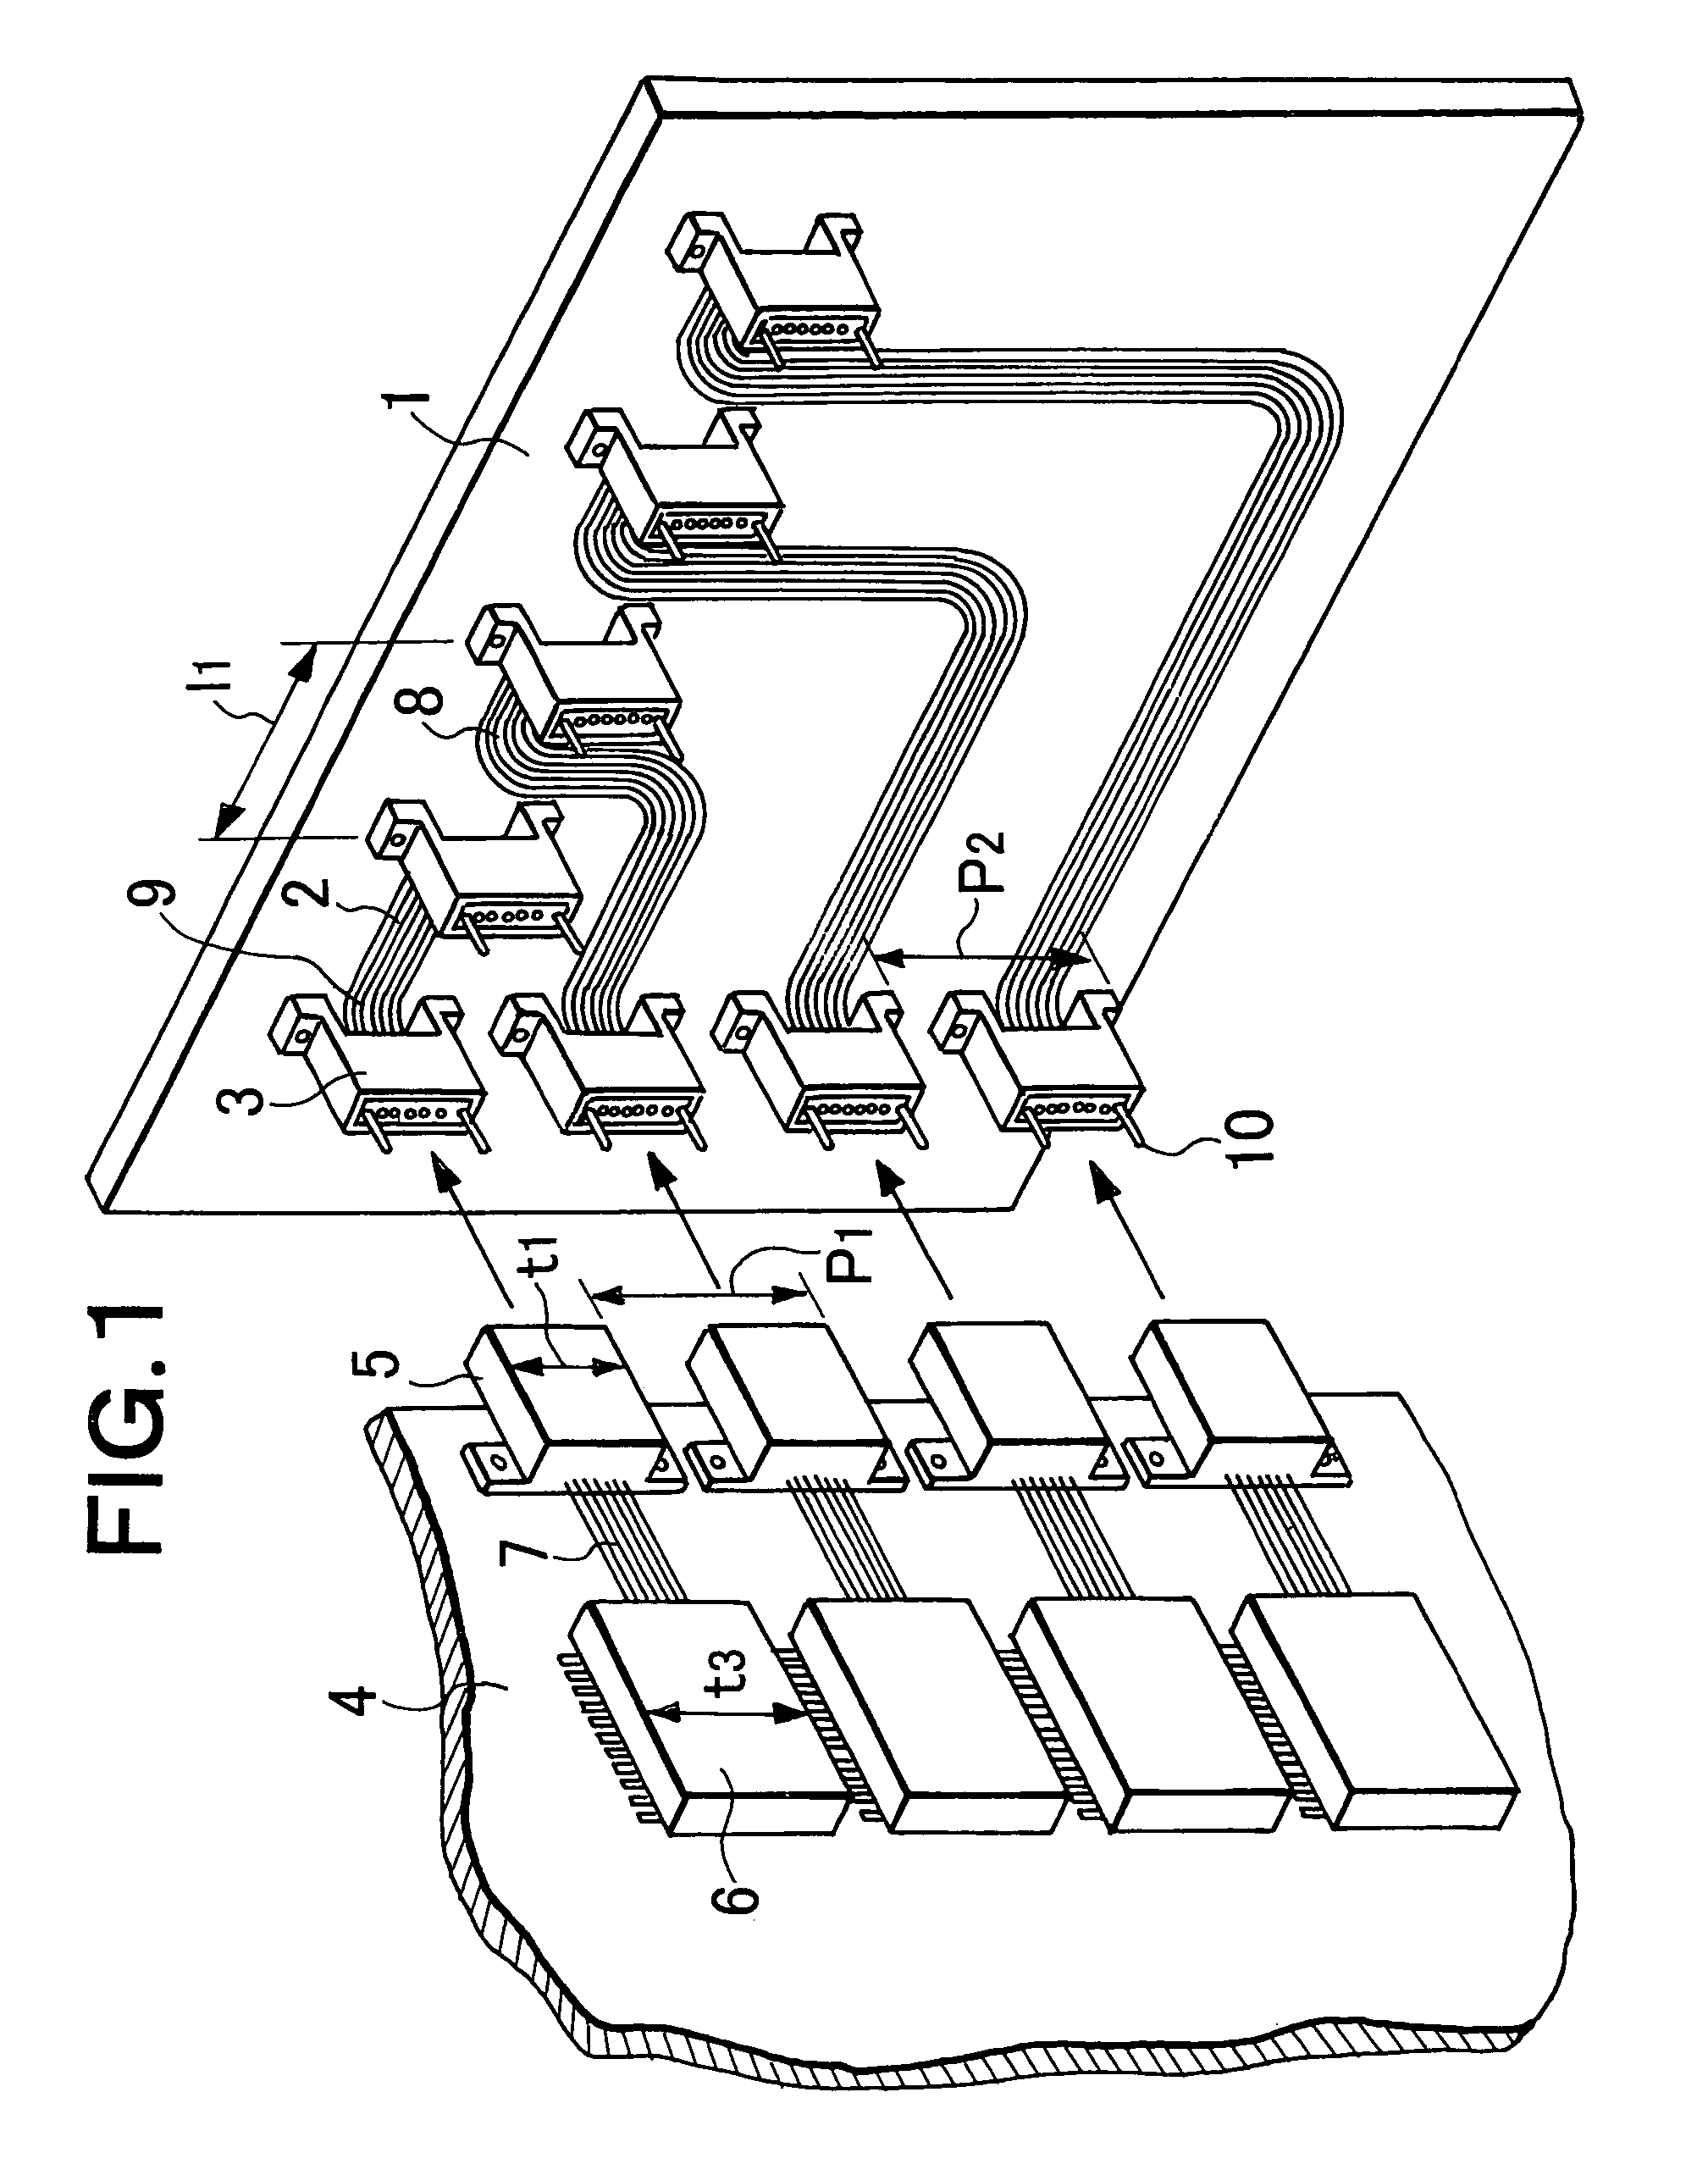 Optical connection structure between optical backplane and circuit substrate